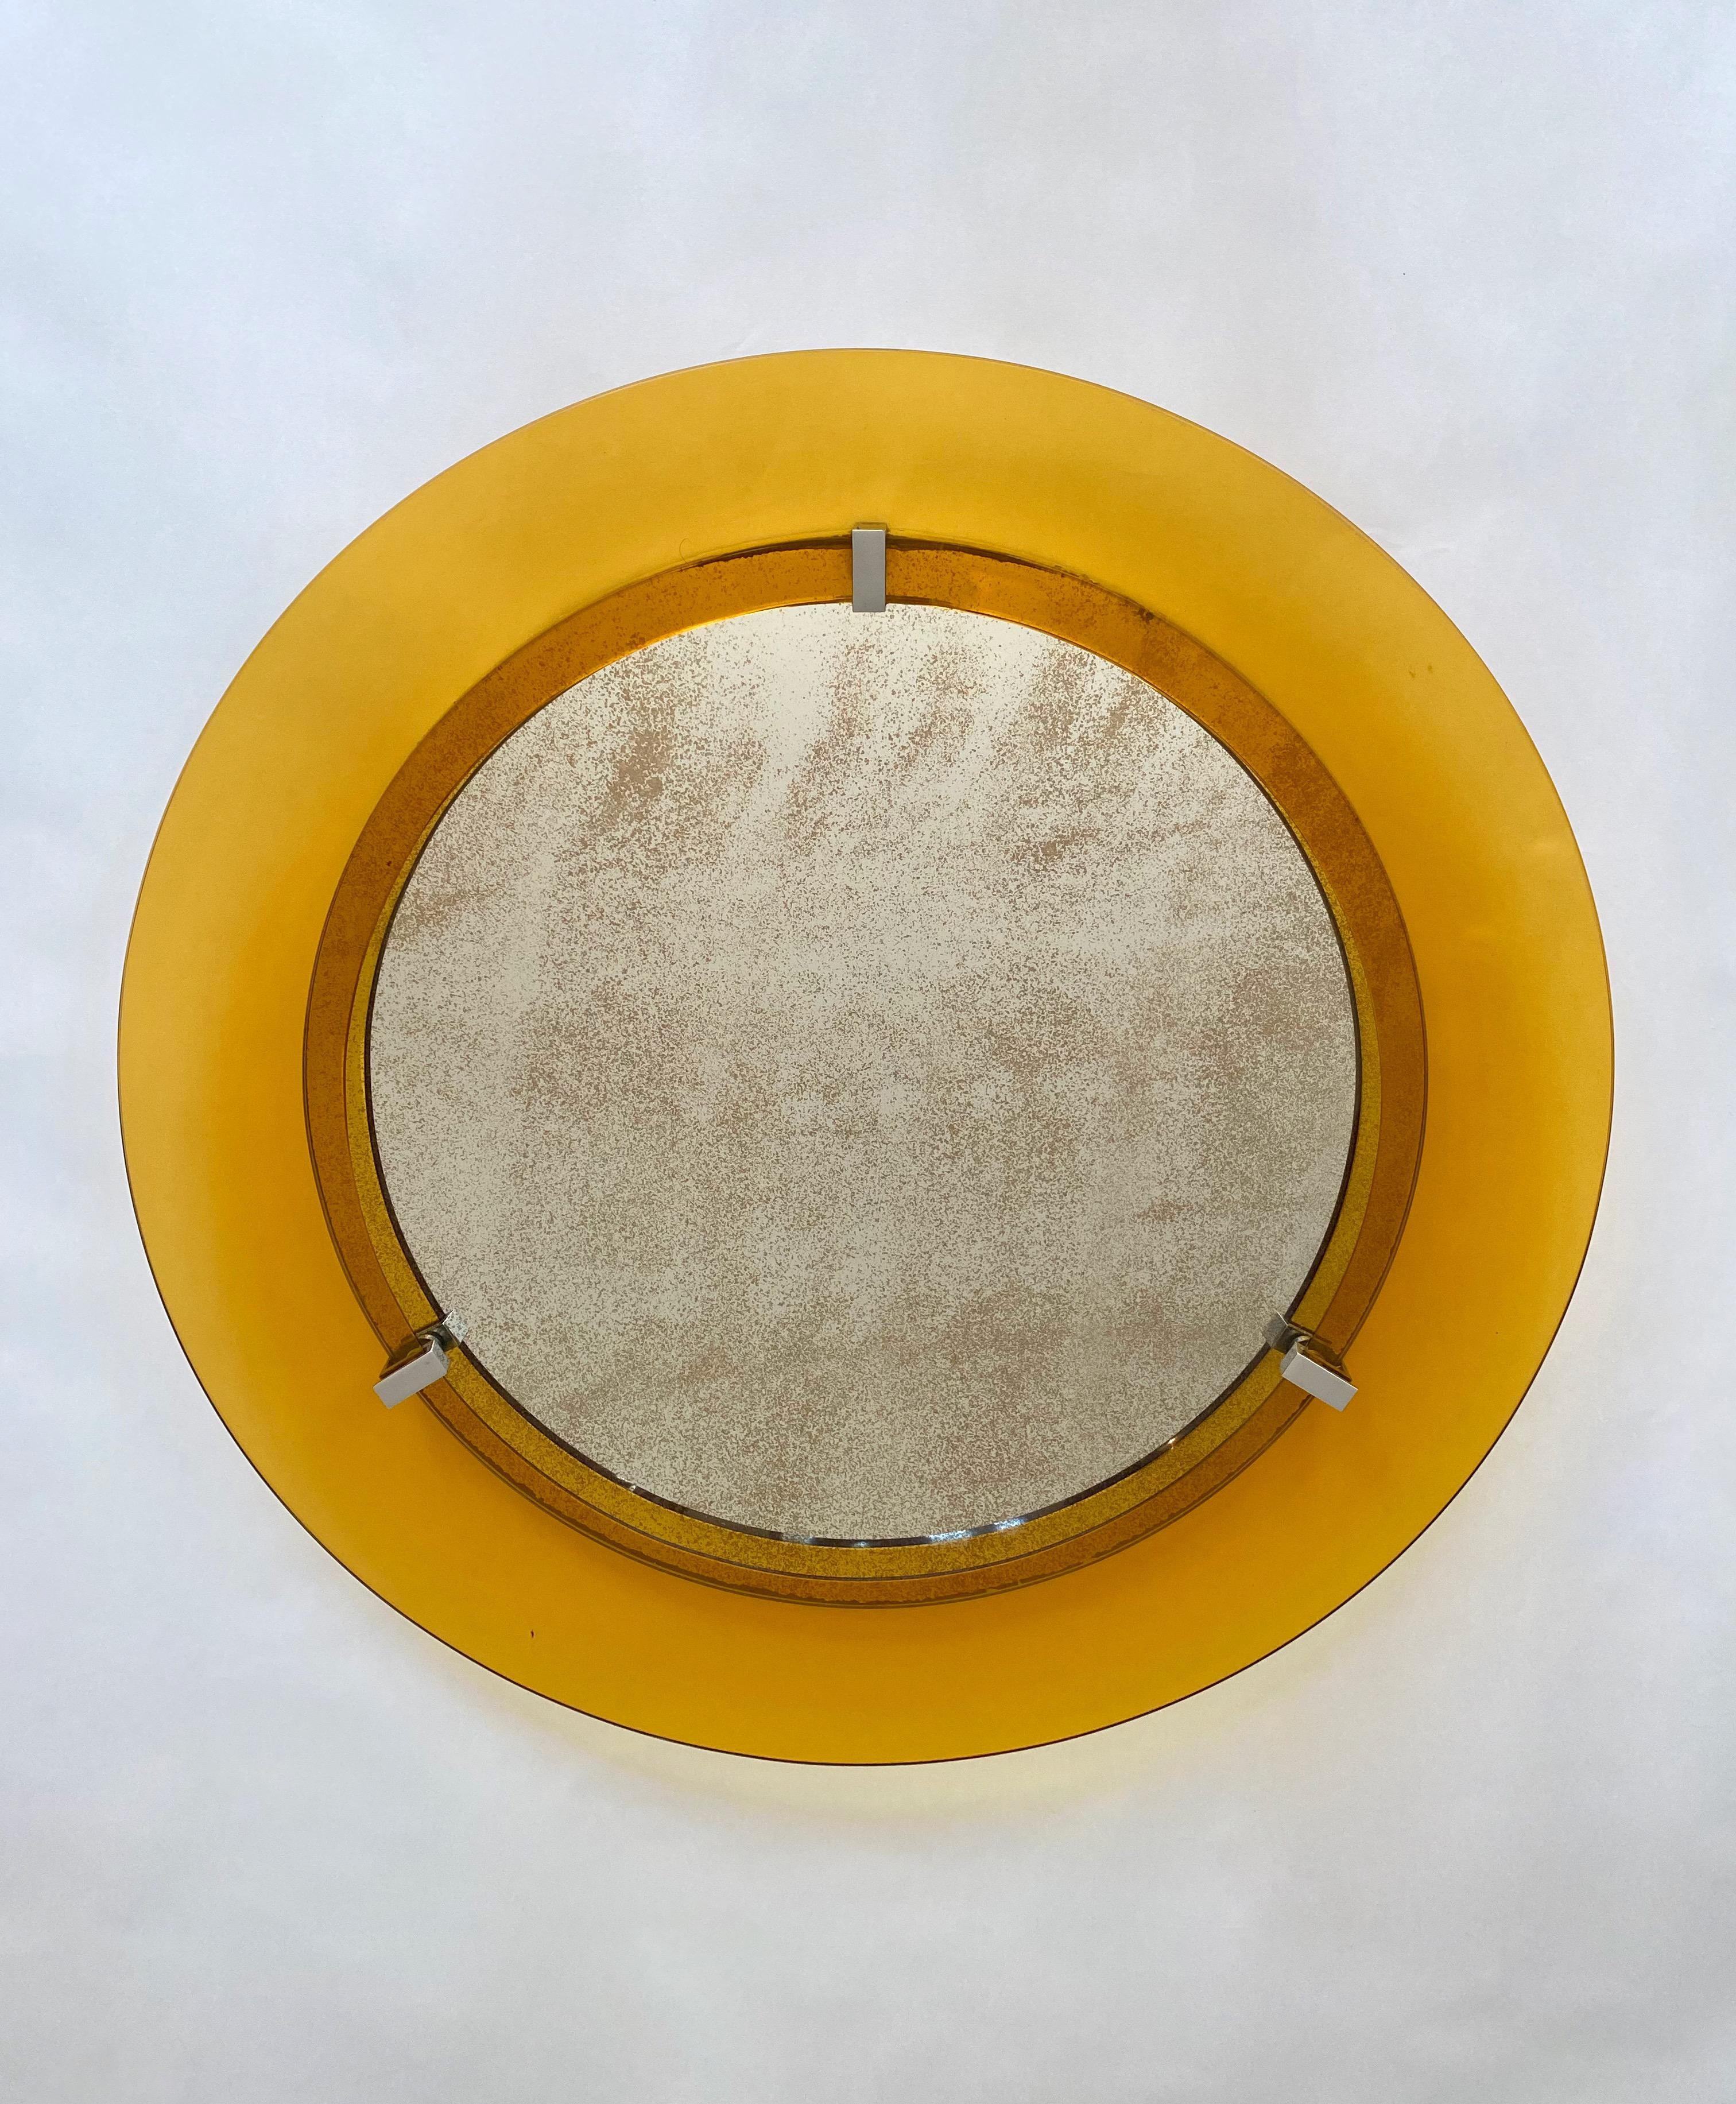 Round wall mirror in a yellow convex glass frame by the Italian design house Veca (original label still attached), 1960s.